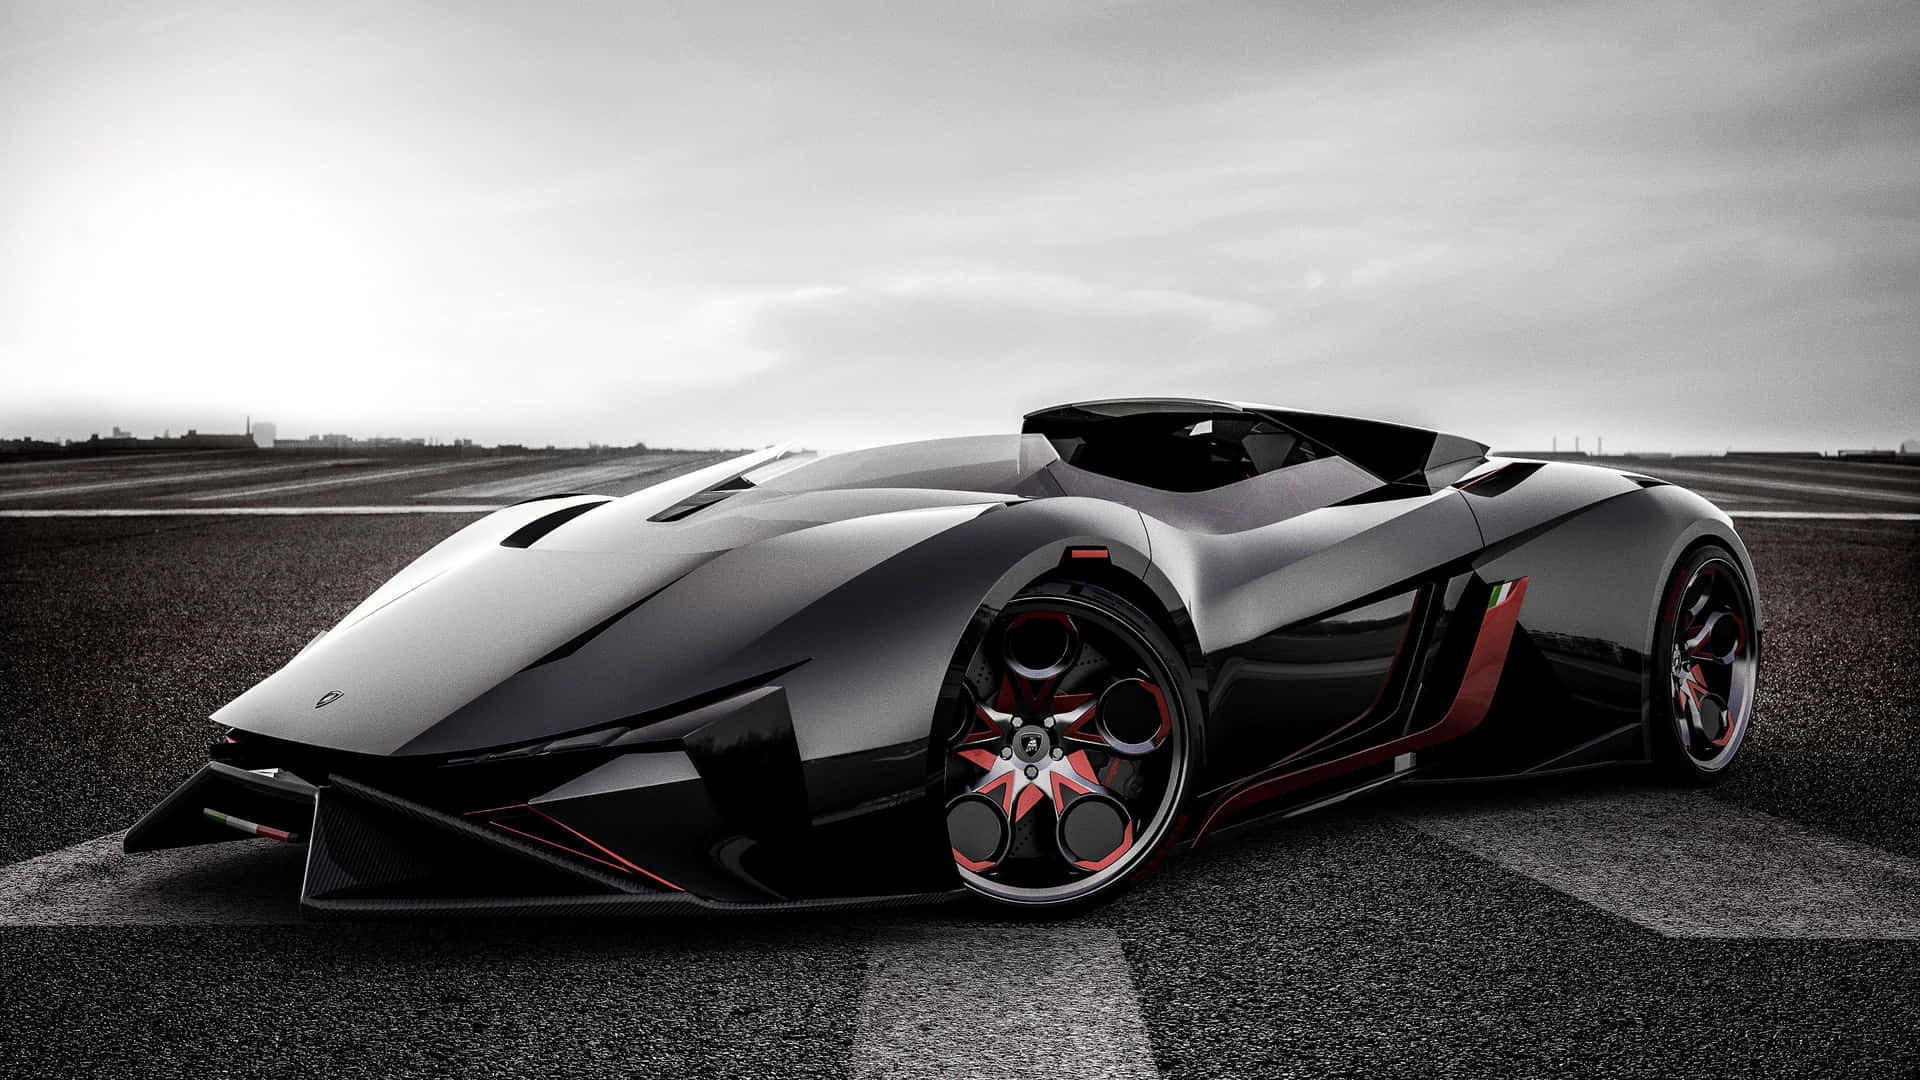 A Black And Red Sports Car On A Runway Wallpaper